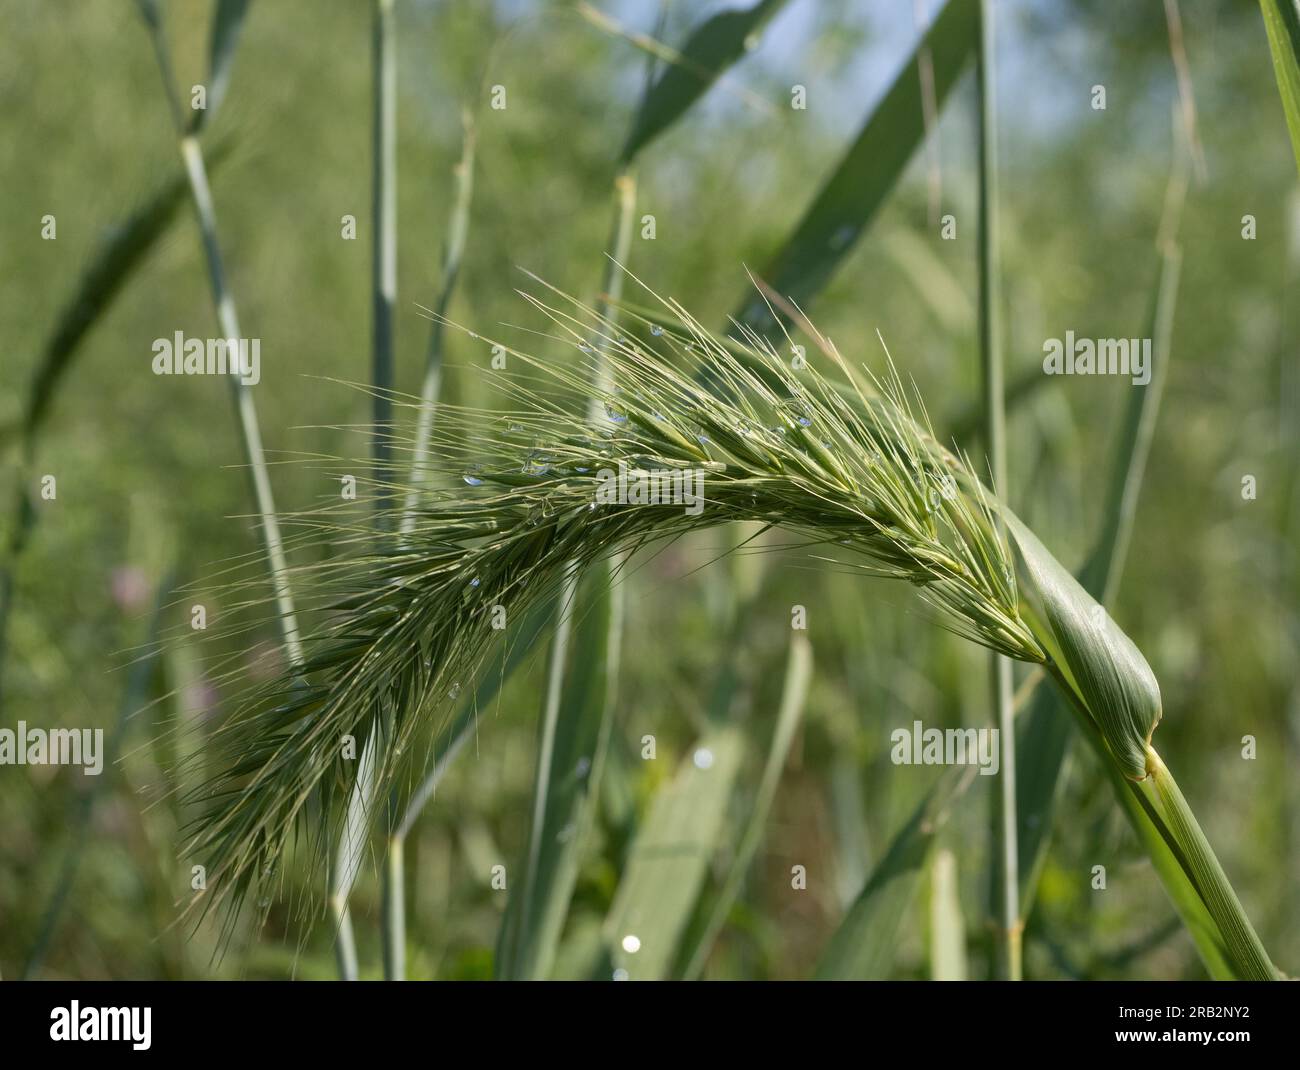 Close-up of florets of Canadian wild rye grass or Elymus canadensis with water droplets. Photographed with a shallow depth of field. Stock Photo